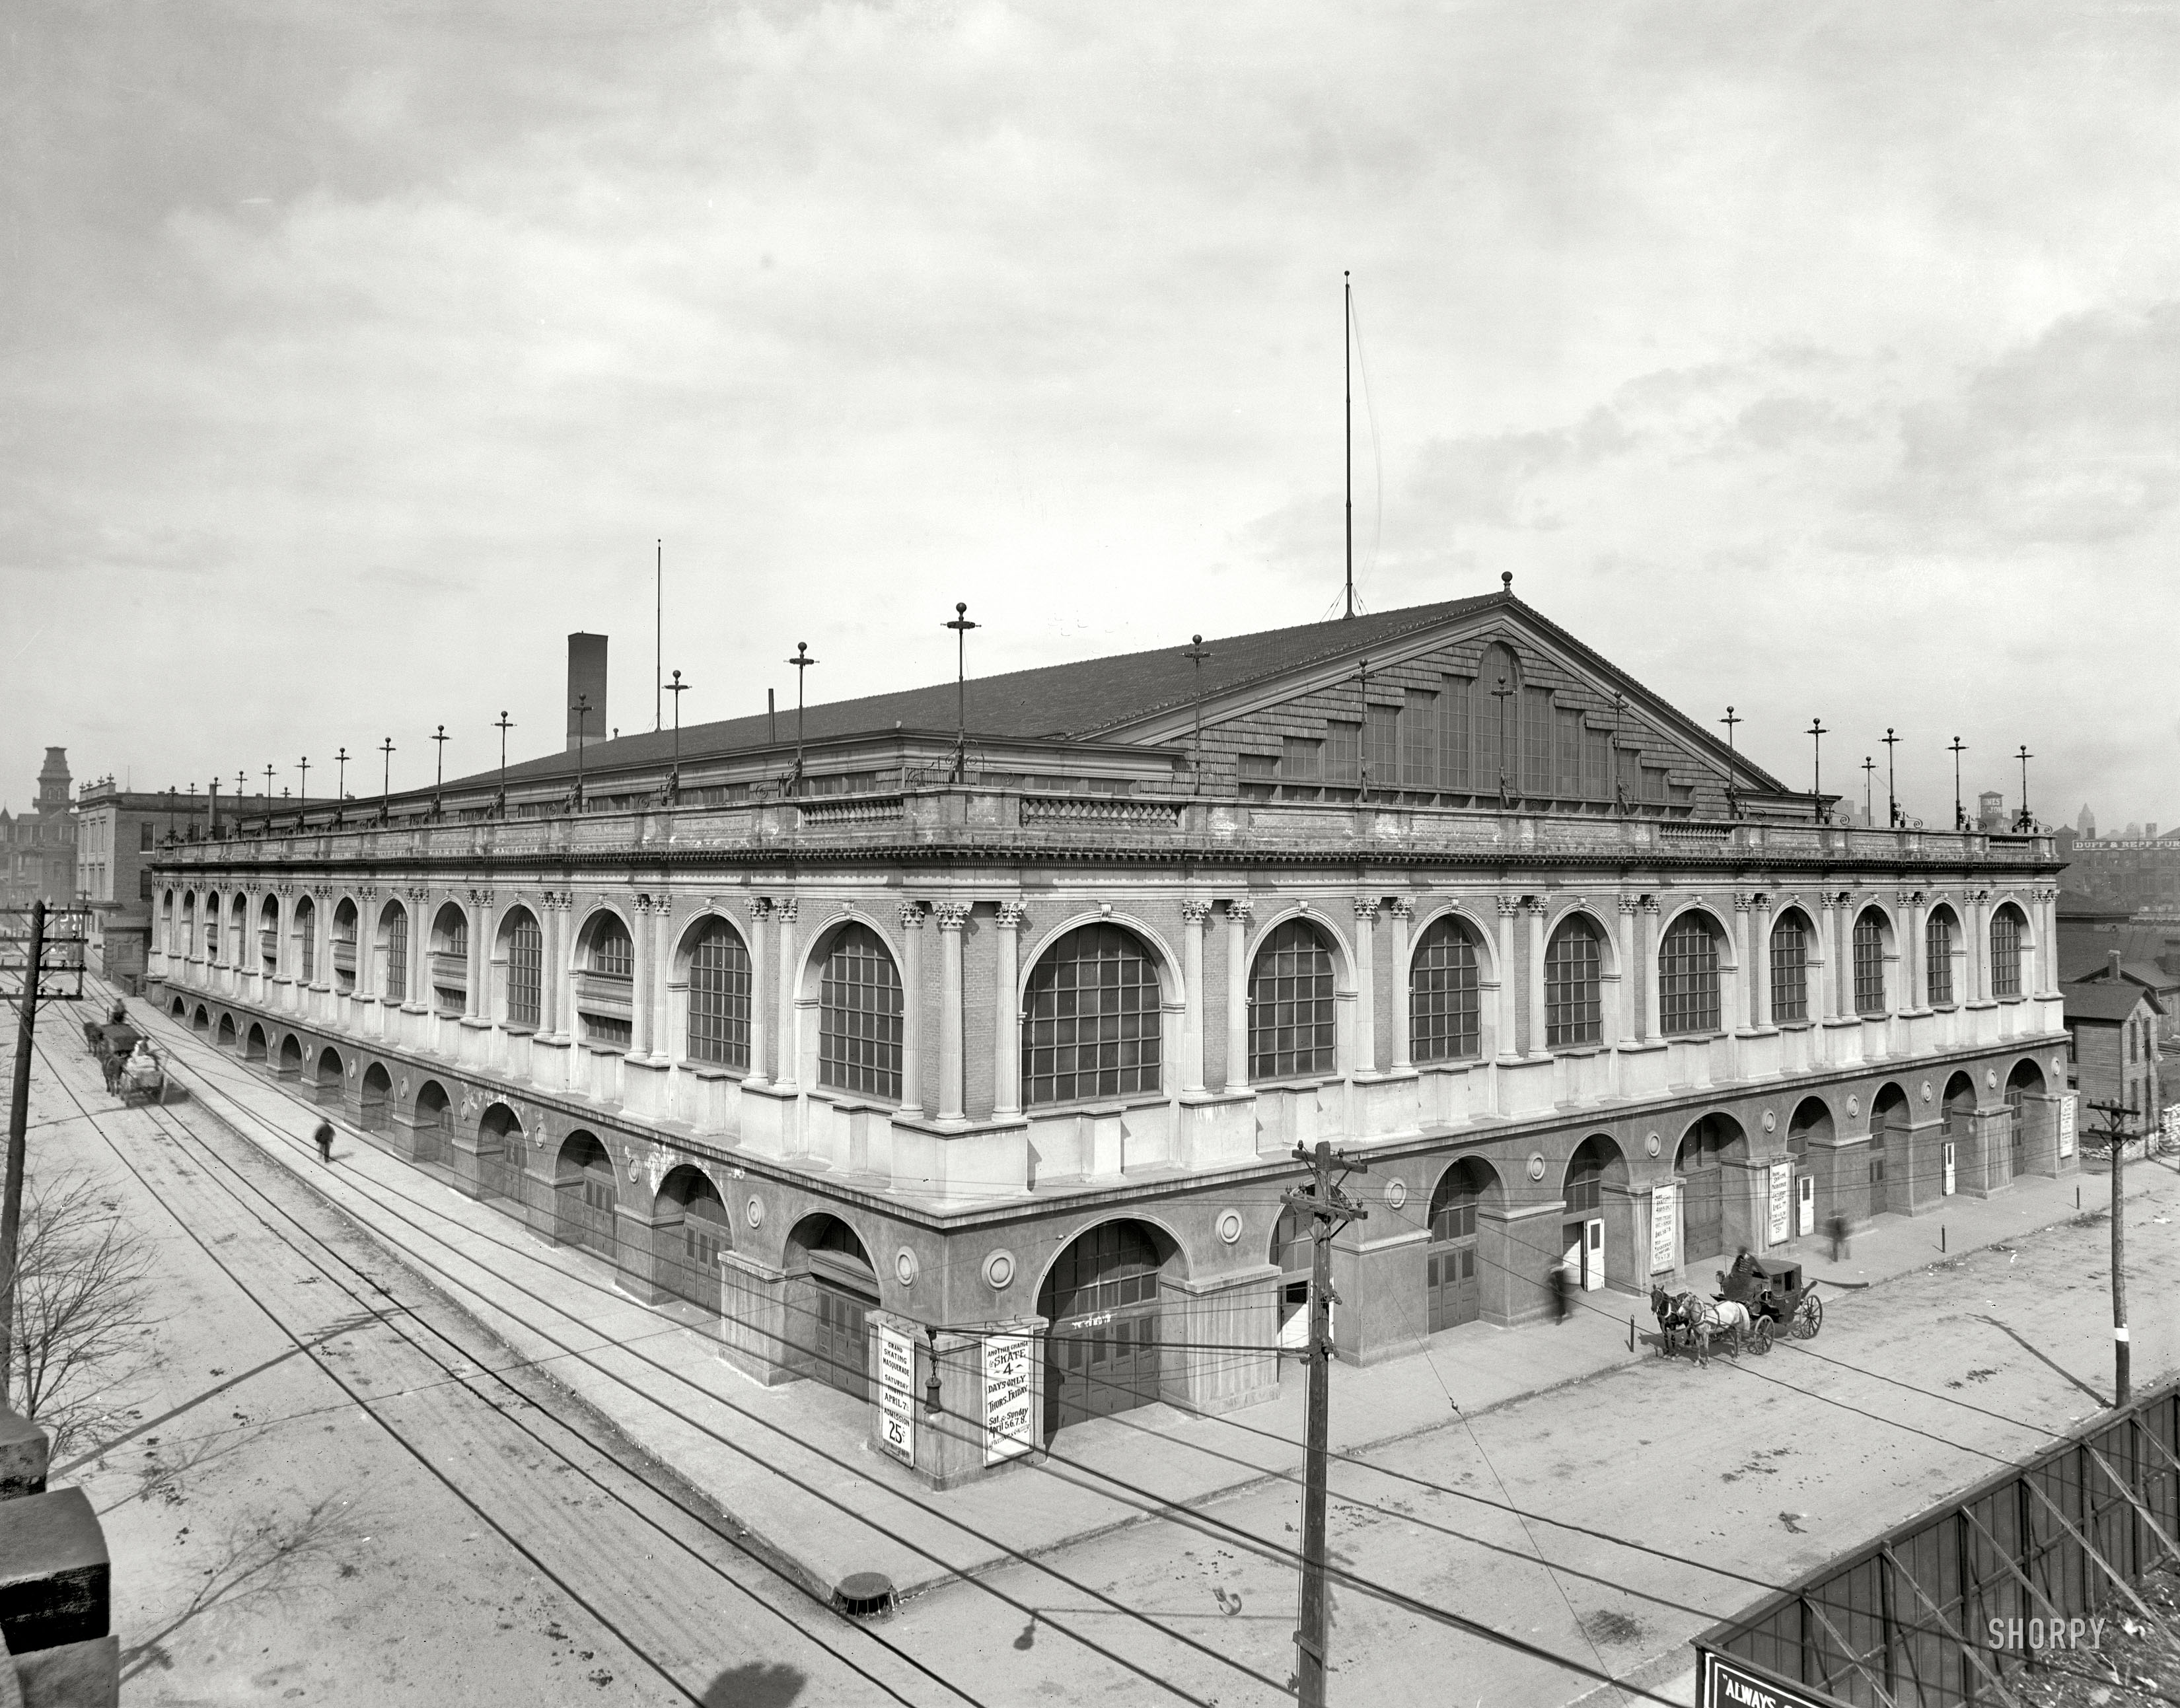 Kansas City, Missouri, circa 1906. "Convention Hall." For four days only, a "Grand Skating Masquerade." 8x10 glass negative, Detroit Publishing Co. View full size.